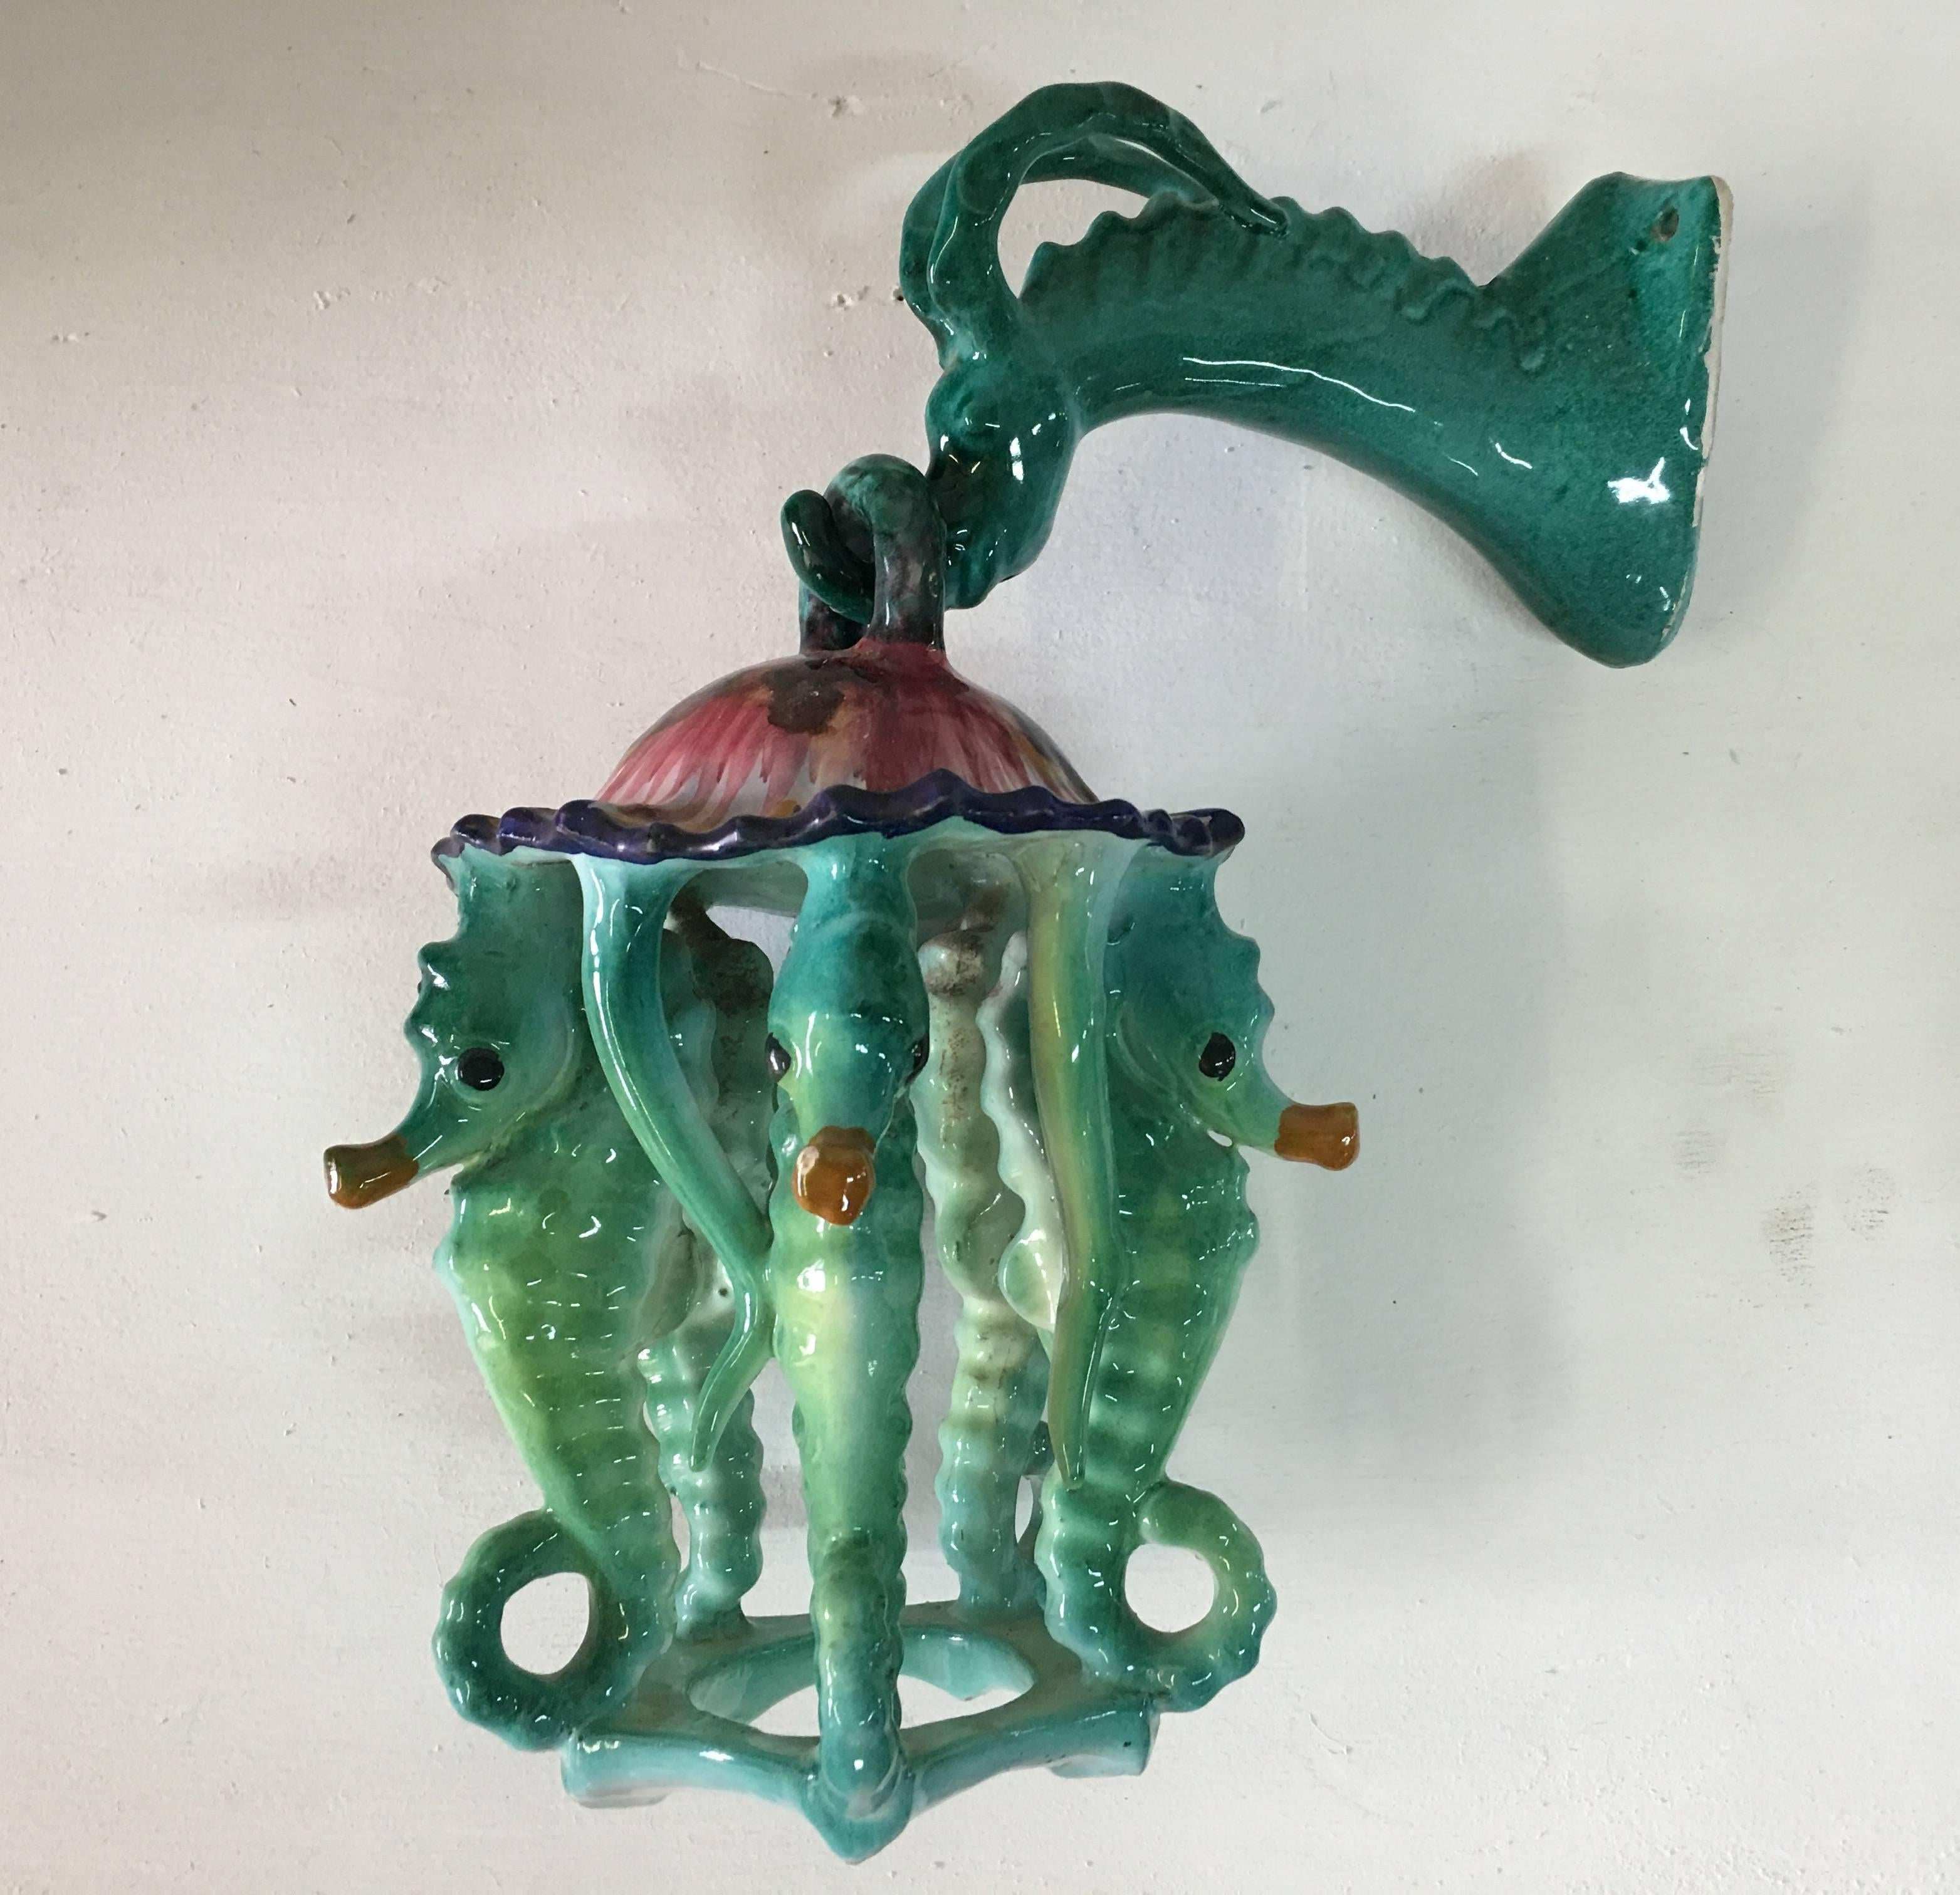 In the Georges Jouve style, these magnificent pair of lanterns are in two parts - the mythical dragon hook and dancing seahorse themes with vibrant colorful glaze. Making these a unique example of wall lights. We think these would look amazing in a